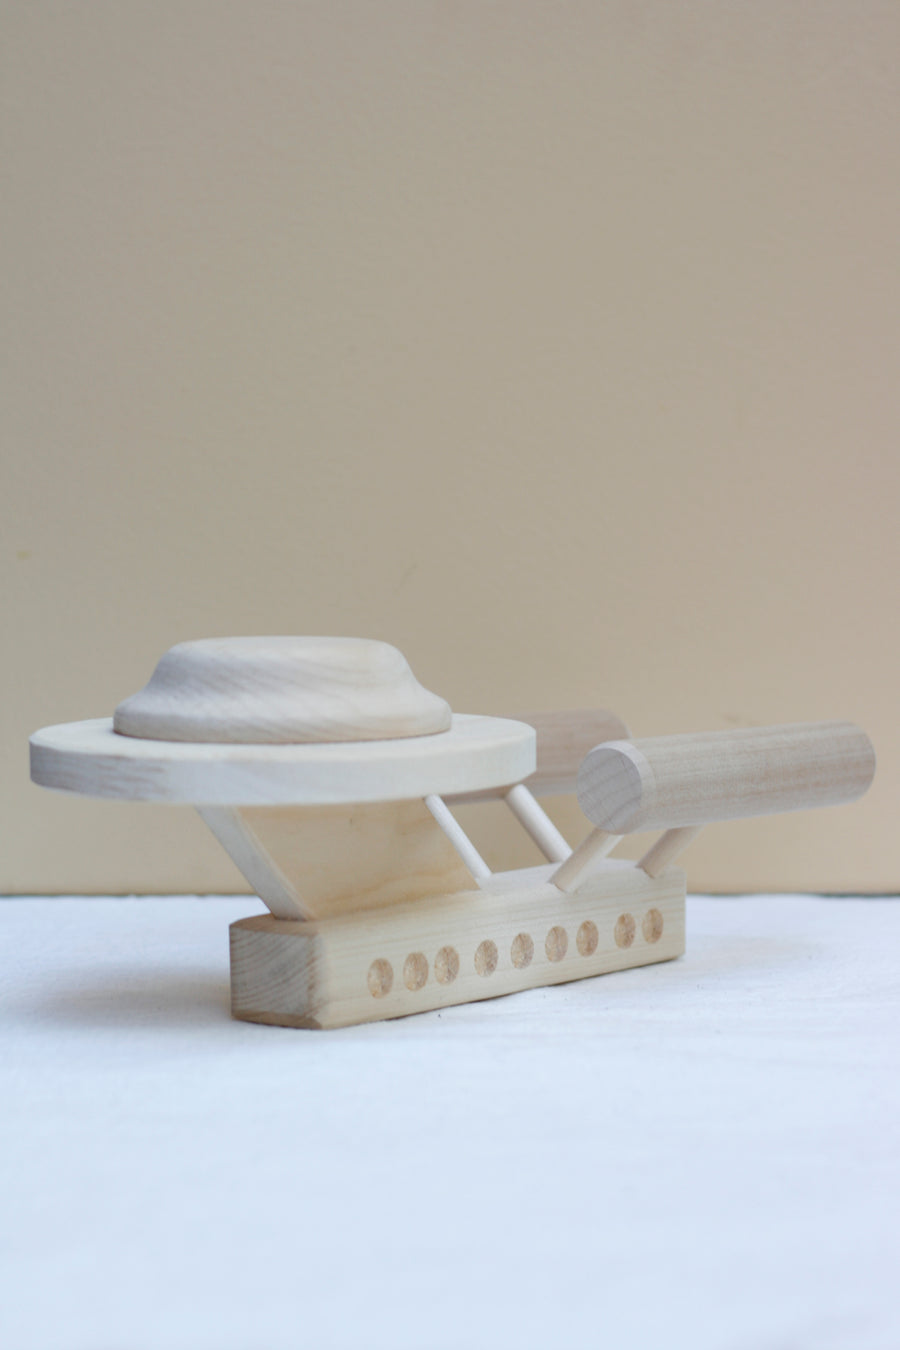 Wooden spaceship by Thorpe Toys